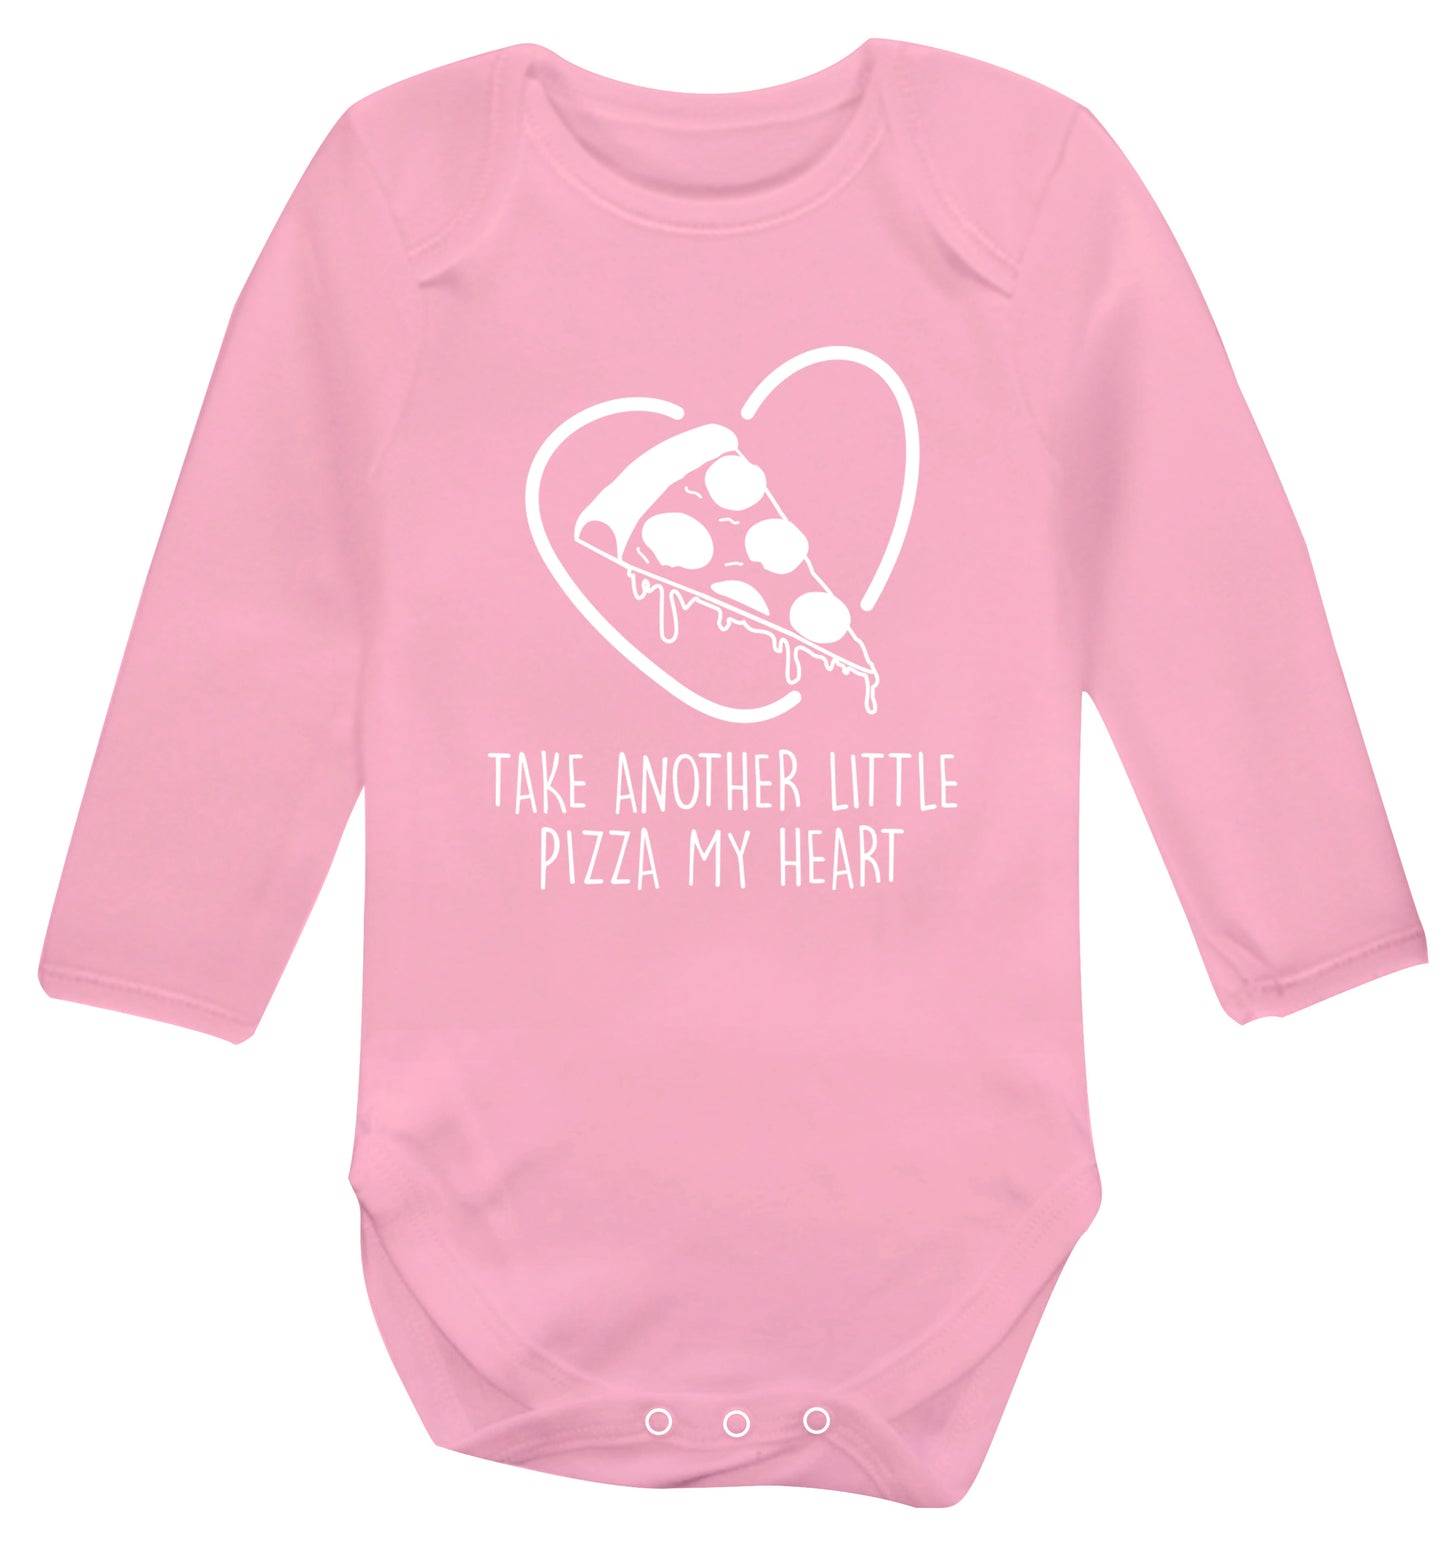 Take another little pizza my heart Baby Vest long sleeved pale pink 6-12 months